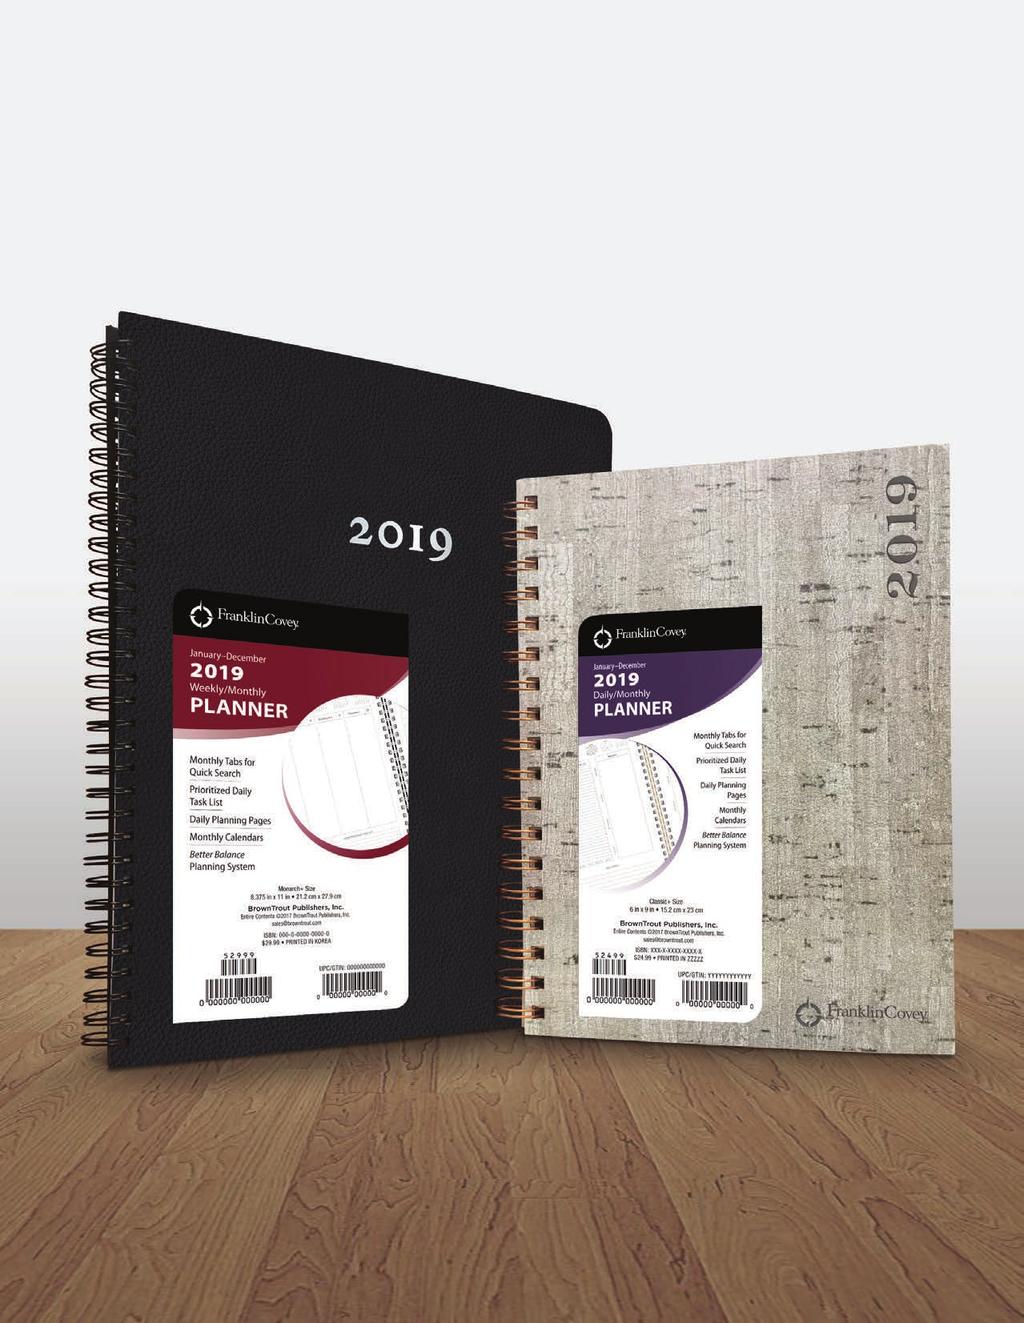 2019 FranklinCovey Planners Rebooted and Ready for Retail! Summer 2018 BrownTrout Publishers, Inc.